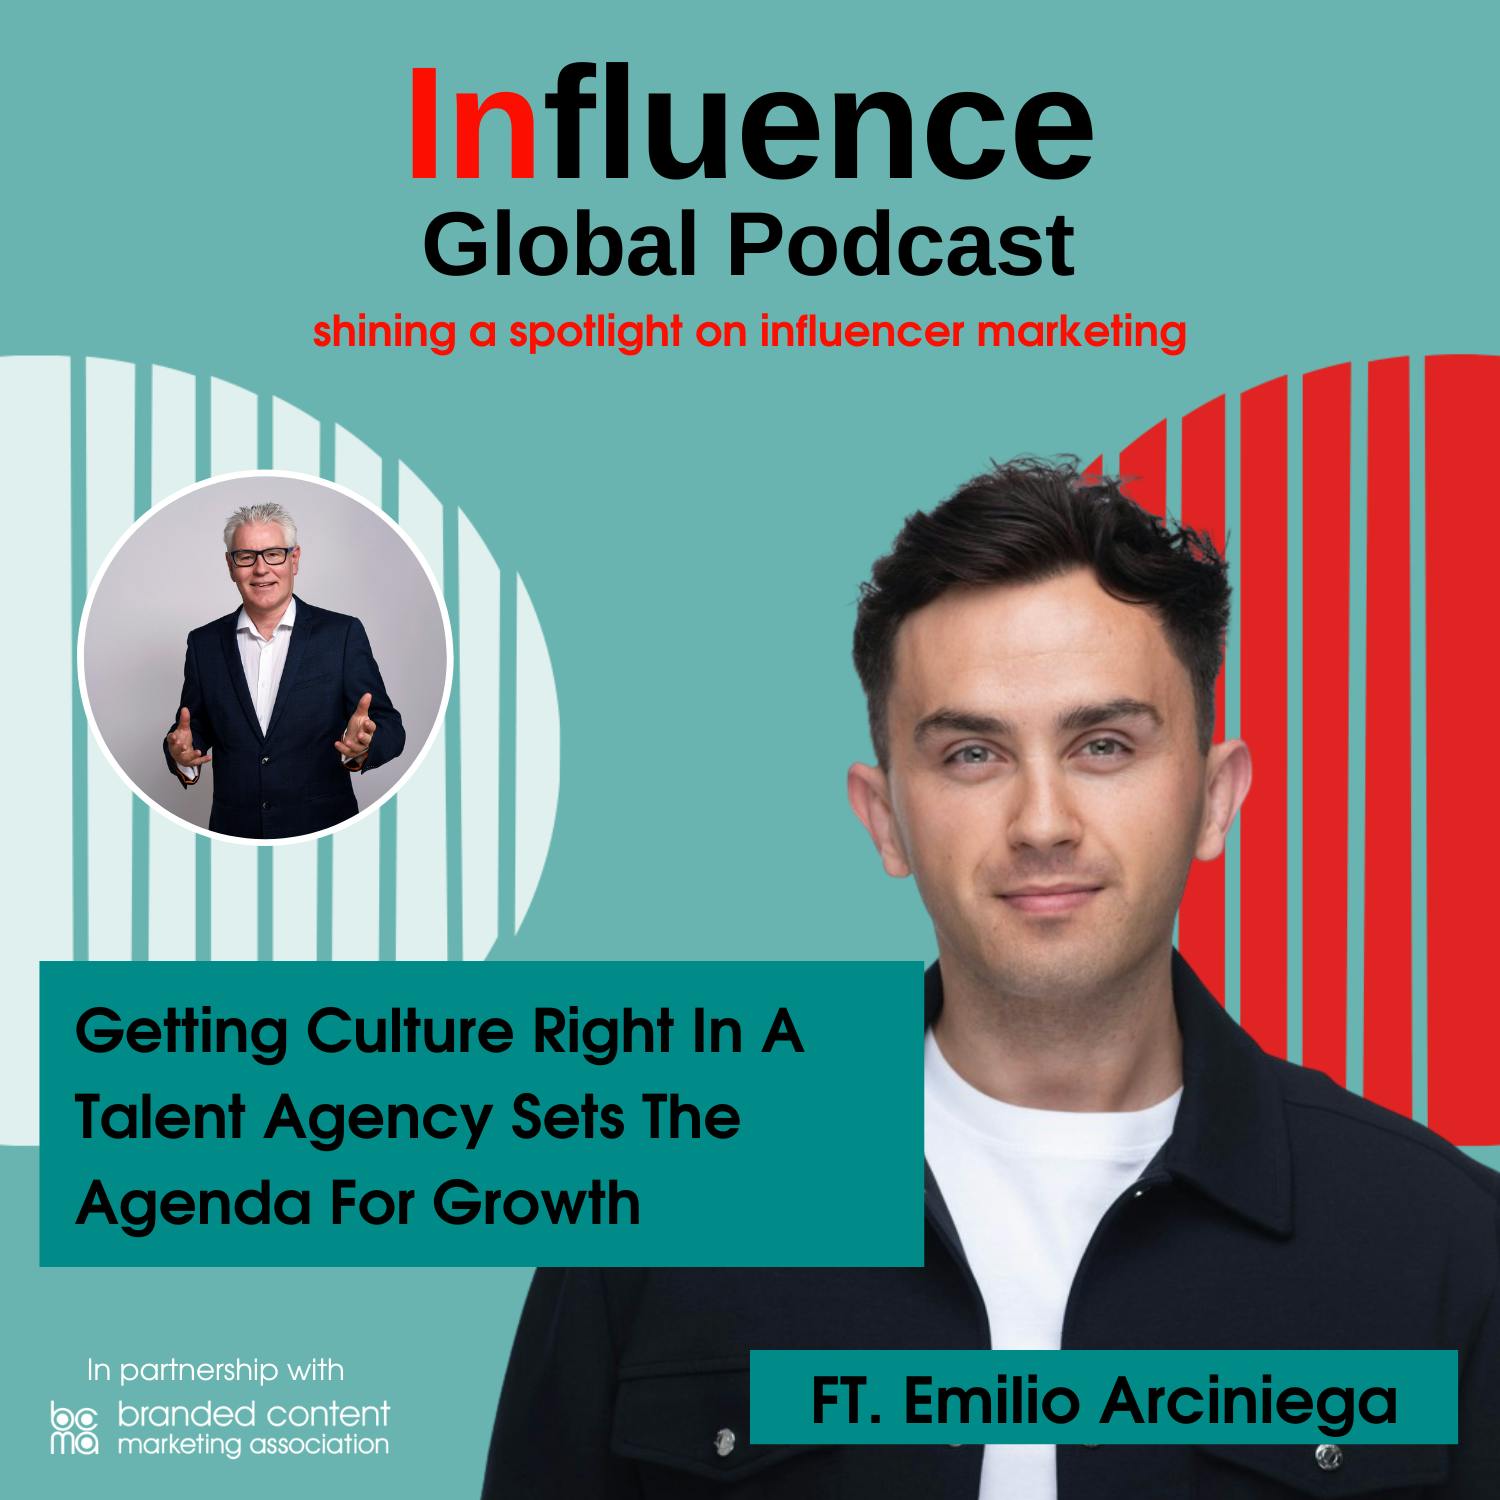 S7 Ep3: Getting Culture Right In A Talent Agency Sets The Agenda For Growth Ft. Emilio Arciniega